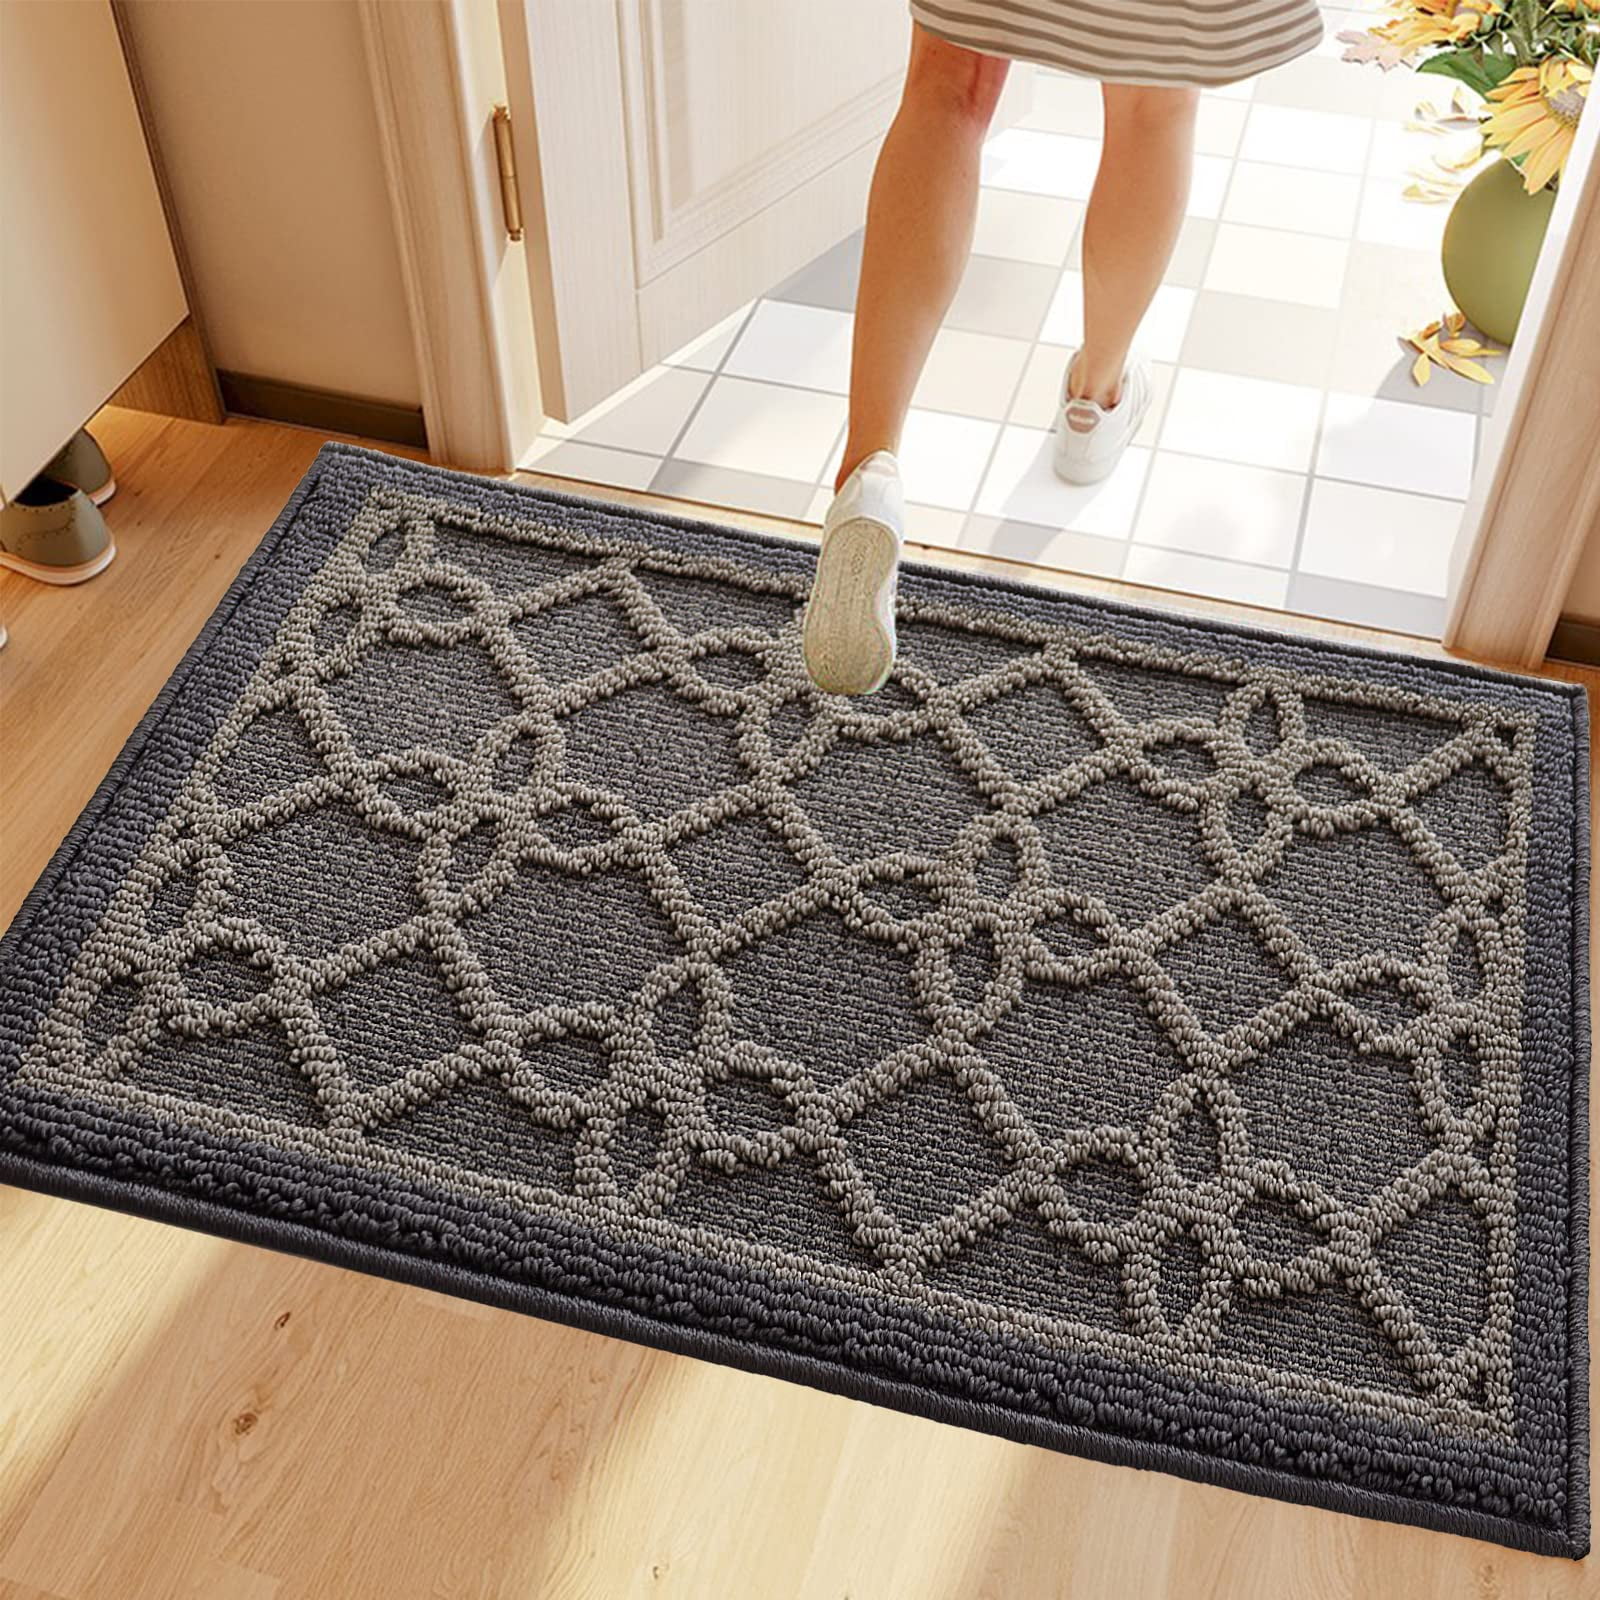 Family Name Entry Rug Personalized Entryway Rug Entrance Rug for Inside  House Indoor Welcome Mat No Pile Non Slip Machine Washable AR212-04 